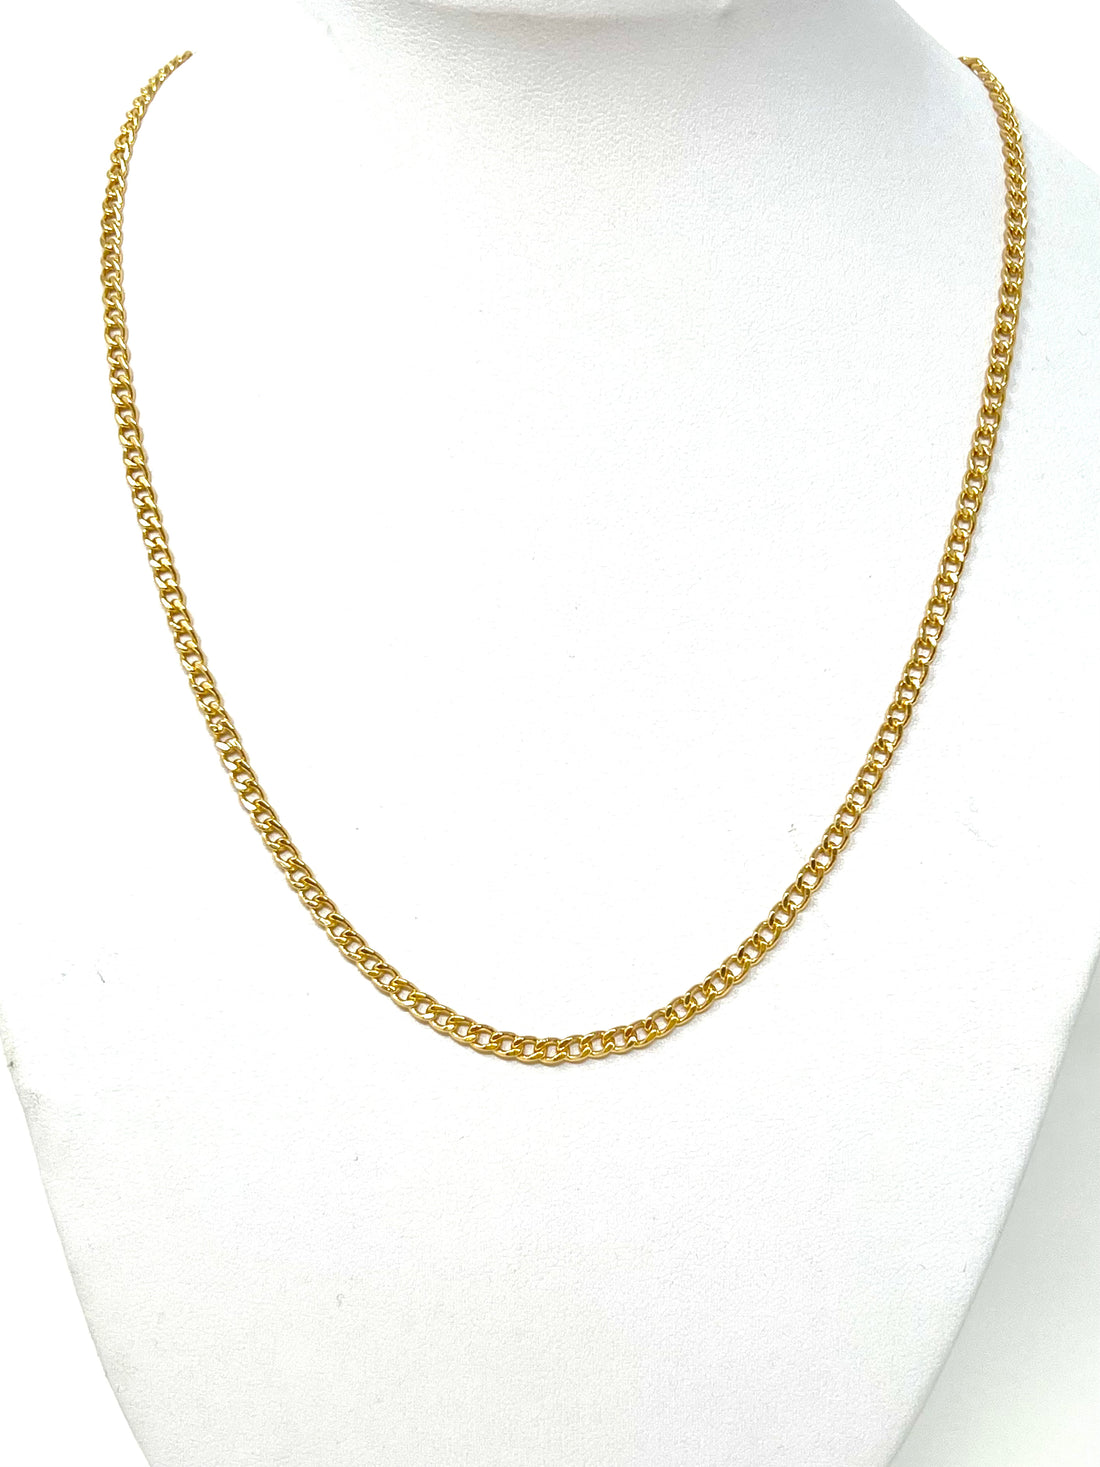 Patrick Gold Chain Necklace